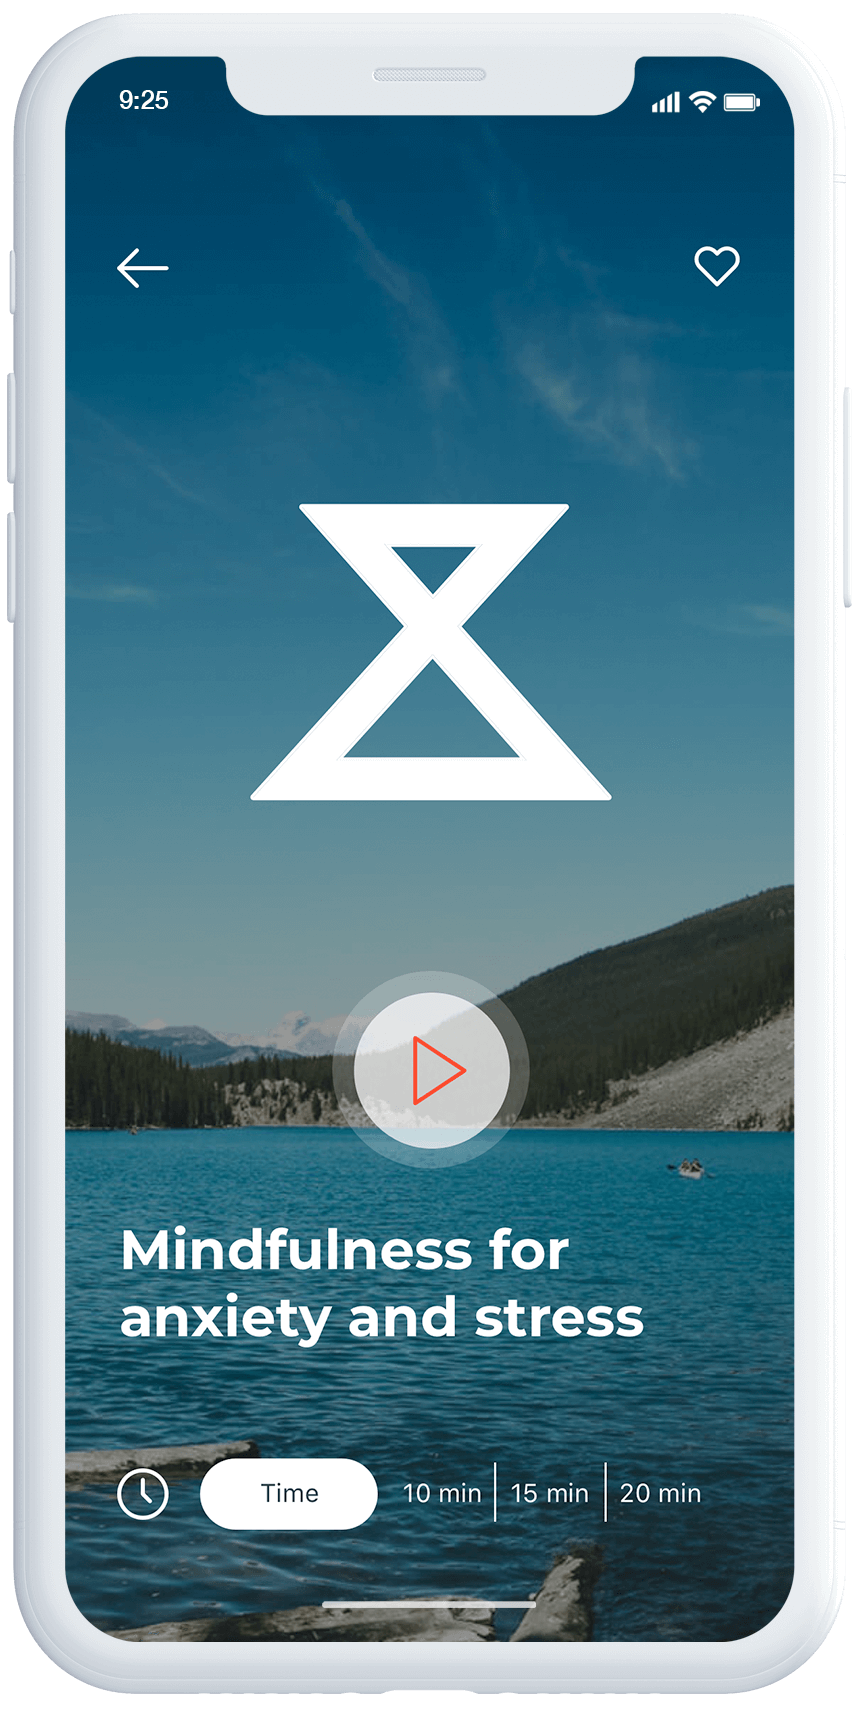 a cell phone with the text mindfulness for anxiety and stress.